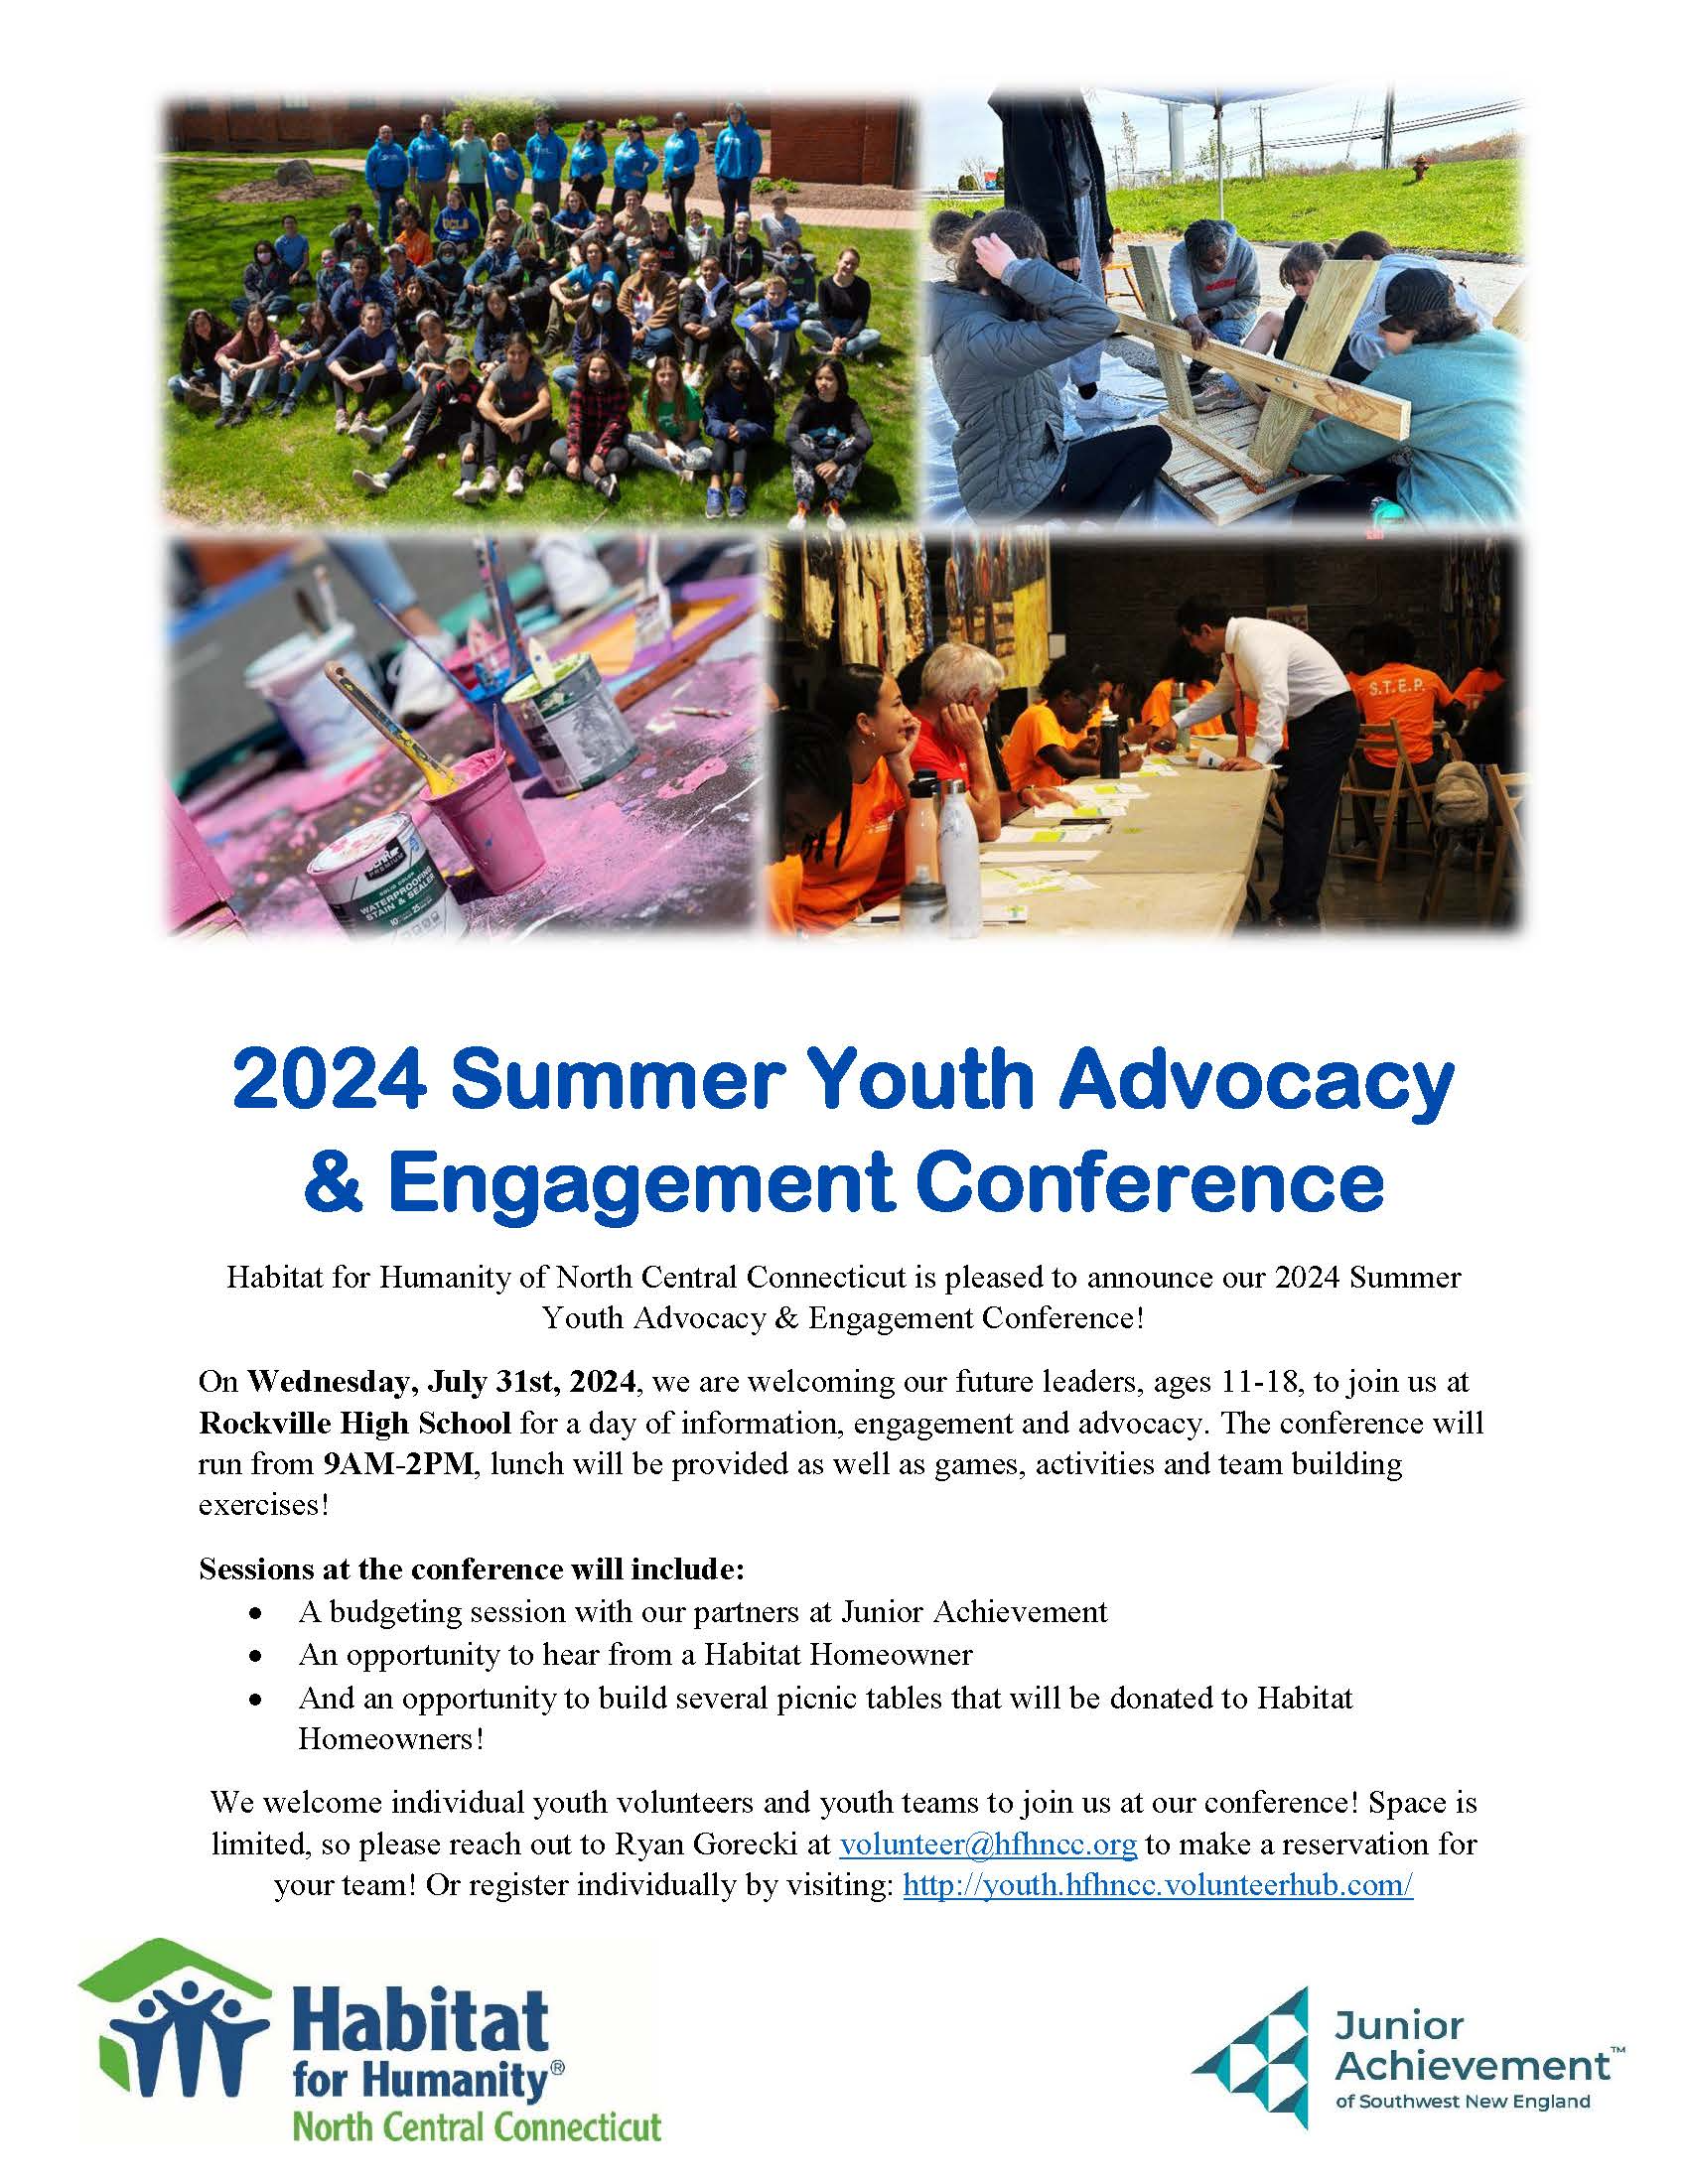  Habitat for Humanity's 2024 Summer Youth Advocacy Conference